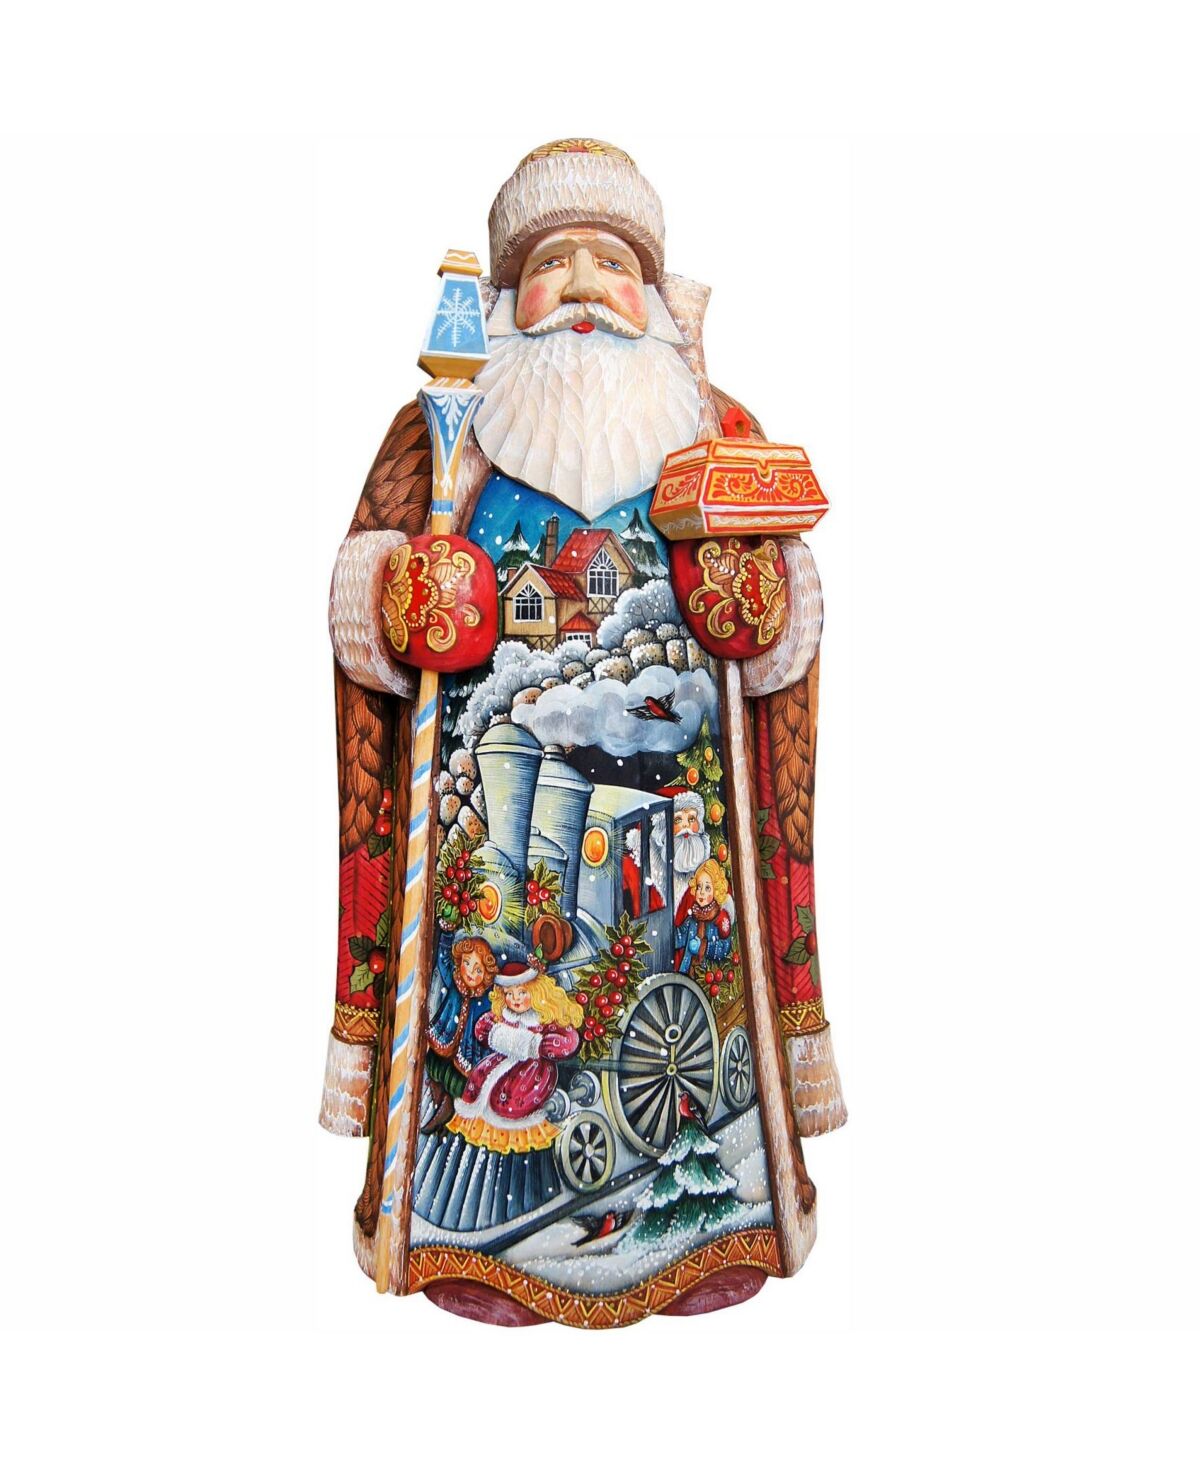 G.DeBrekht Woodcarved and Hand Painted Train Ride Santa Claus Figurine - Multi